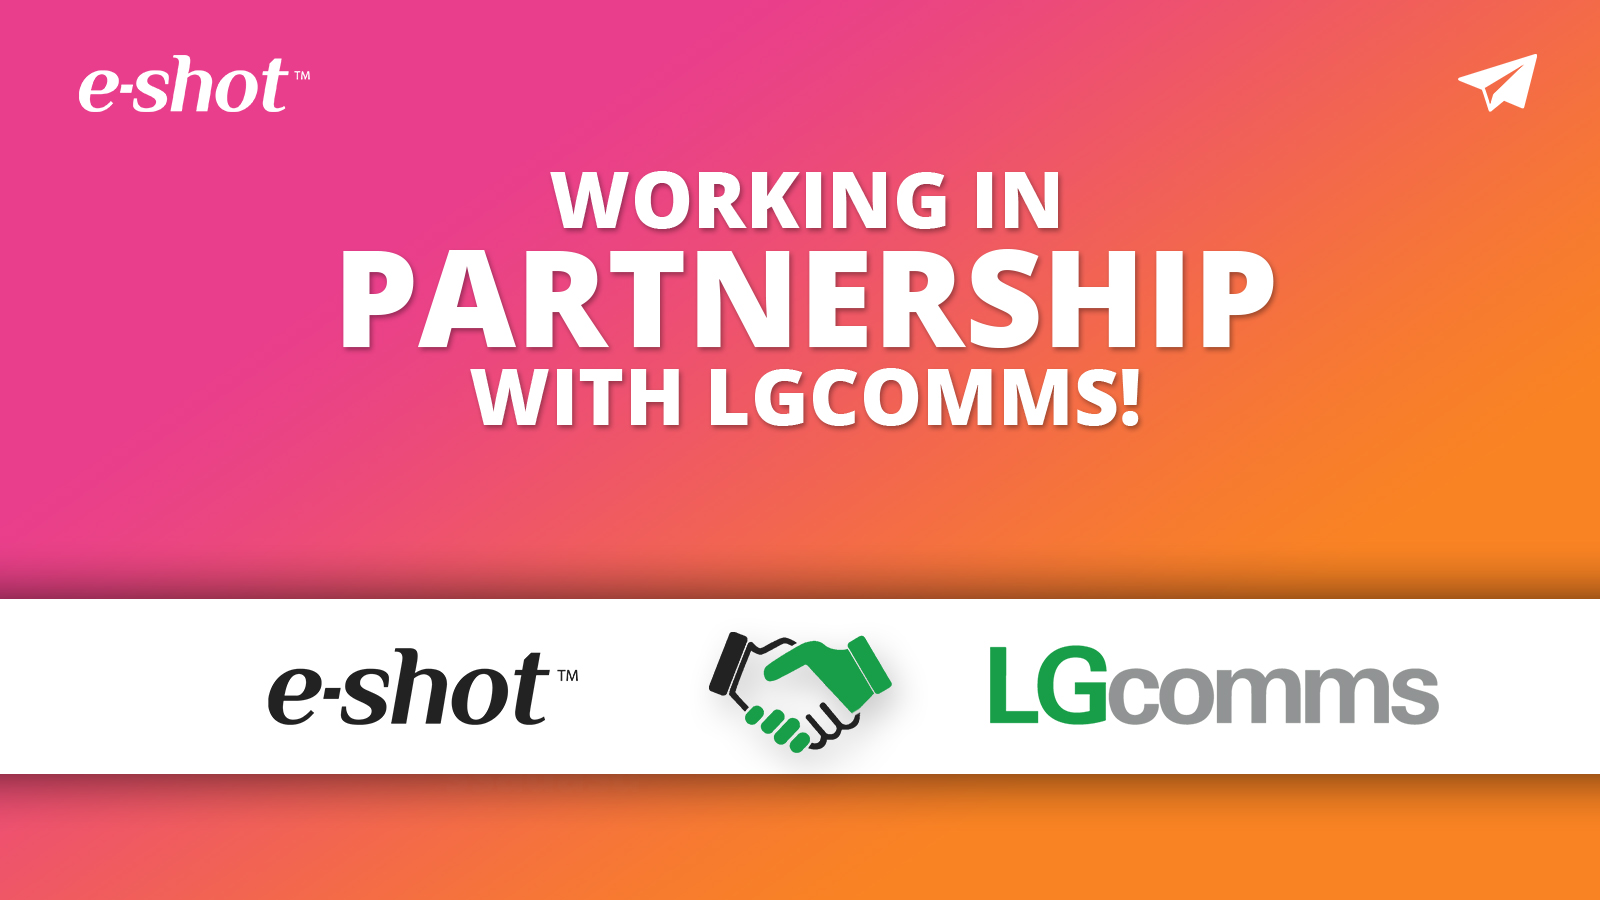 e-shot and LGComms in partnership